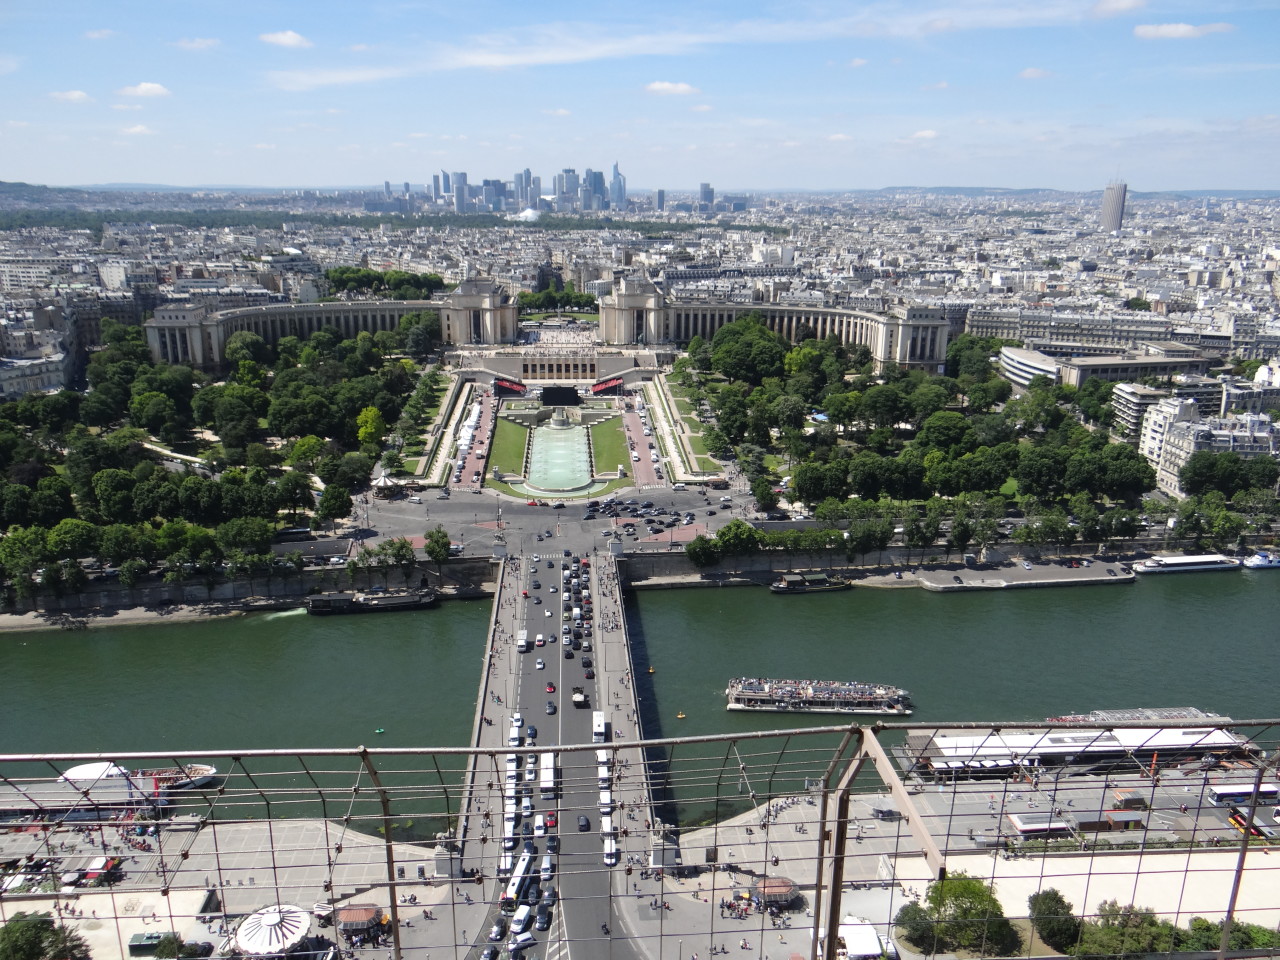 File:View from the second floor of the Eiffel Tower, July 2009.jpg